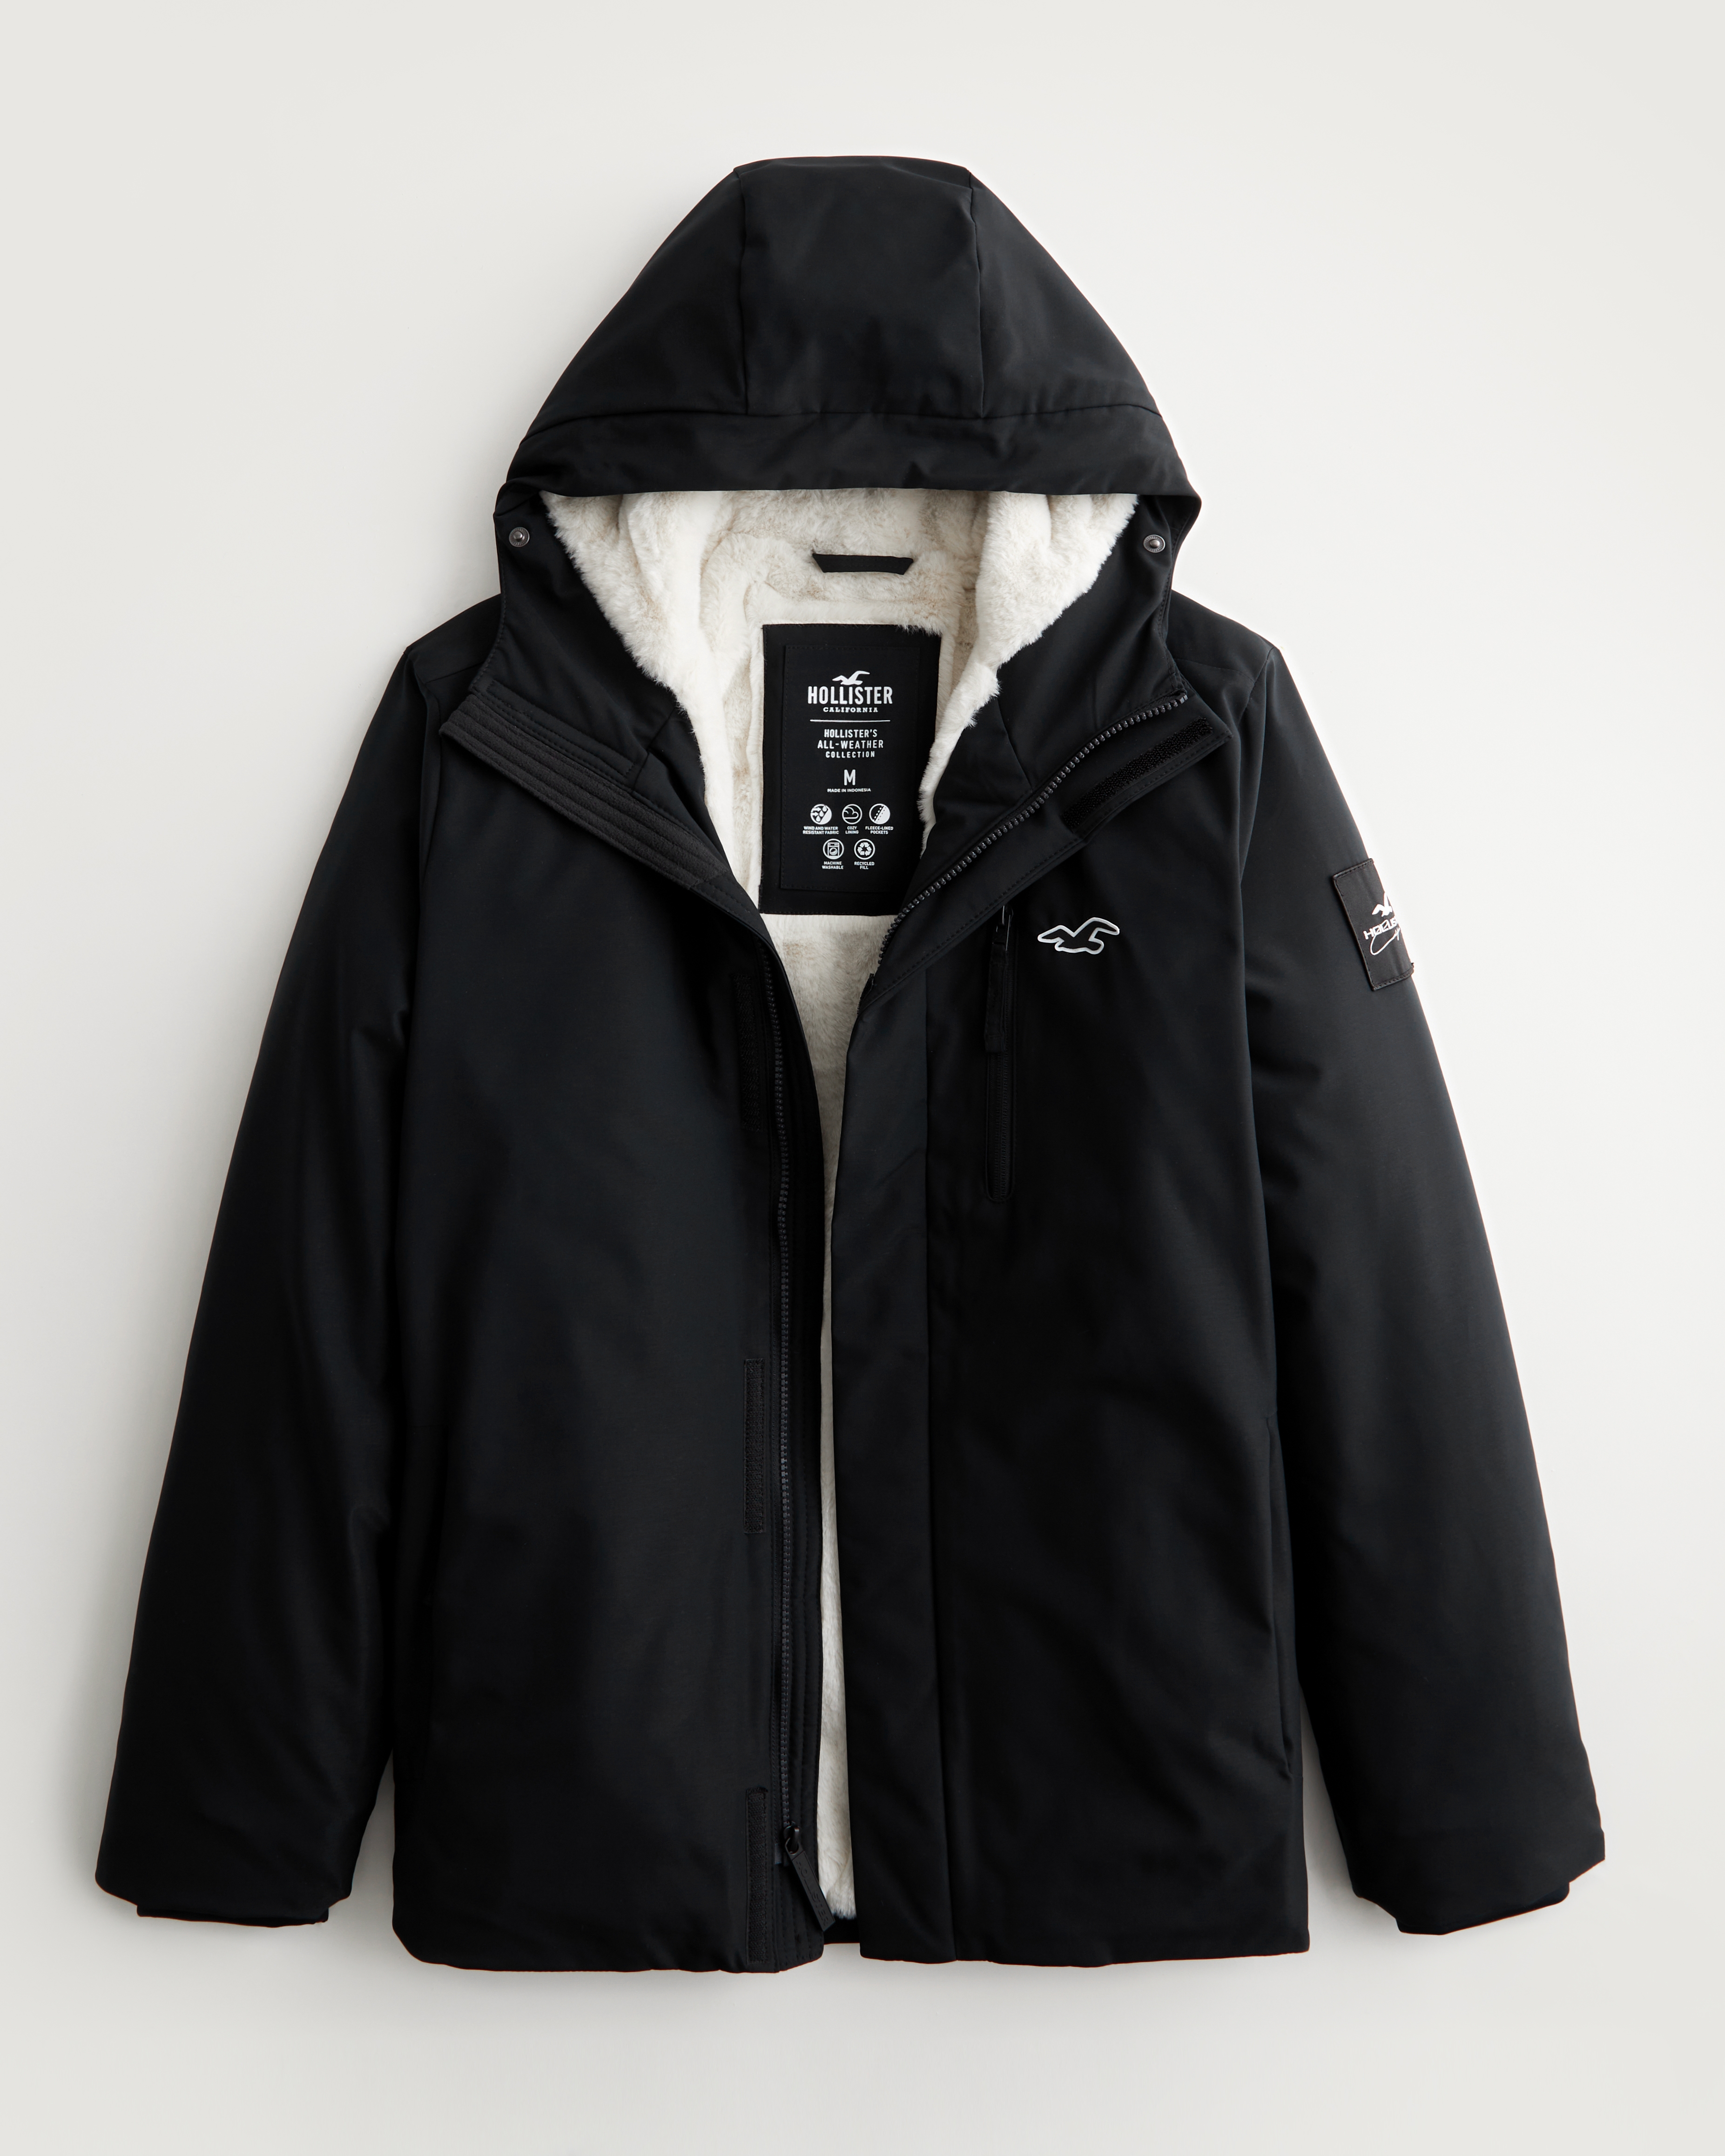 Hollister All-Weather Collection Sherpa Lined Jacket - Coats & jackets